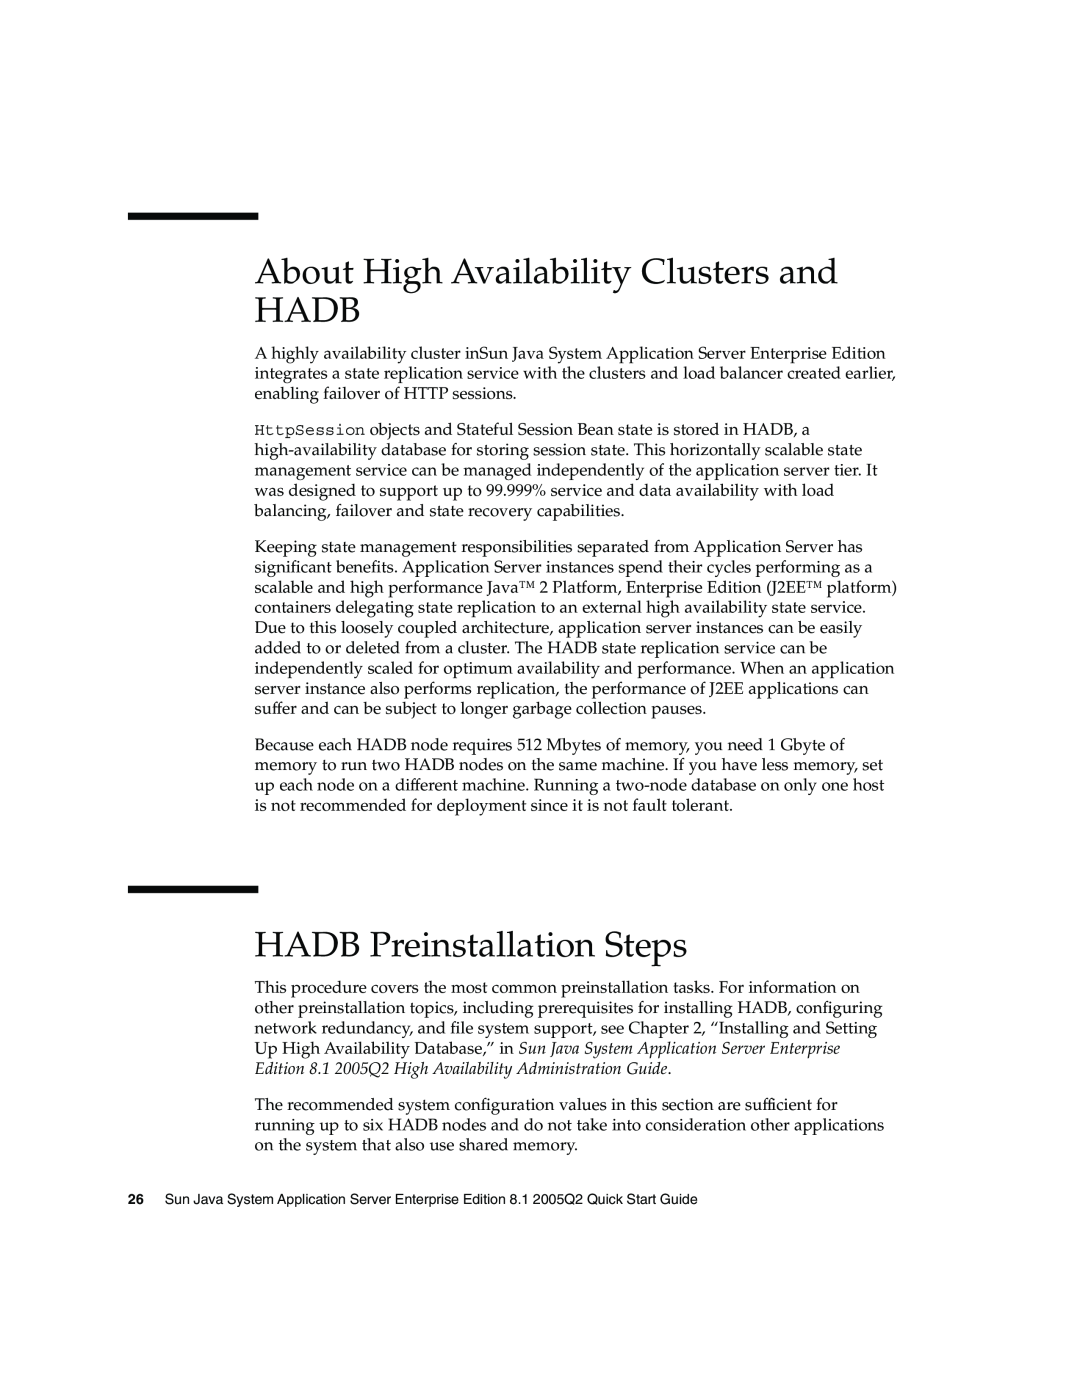 Sun Microsystems 2005Q2 quick start About High Availability Clusters and HADB, HADB Preinstallation Steps 